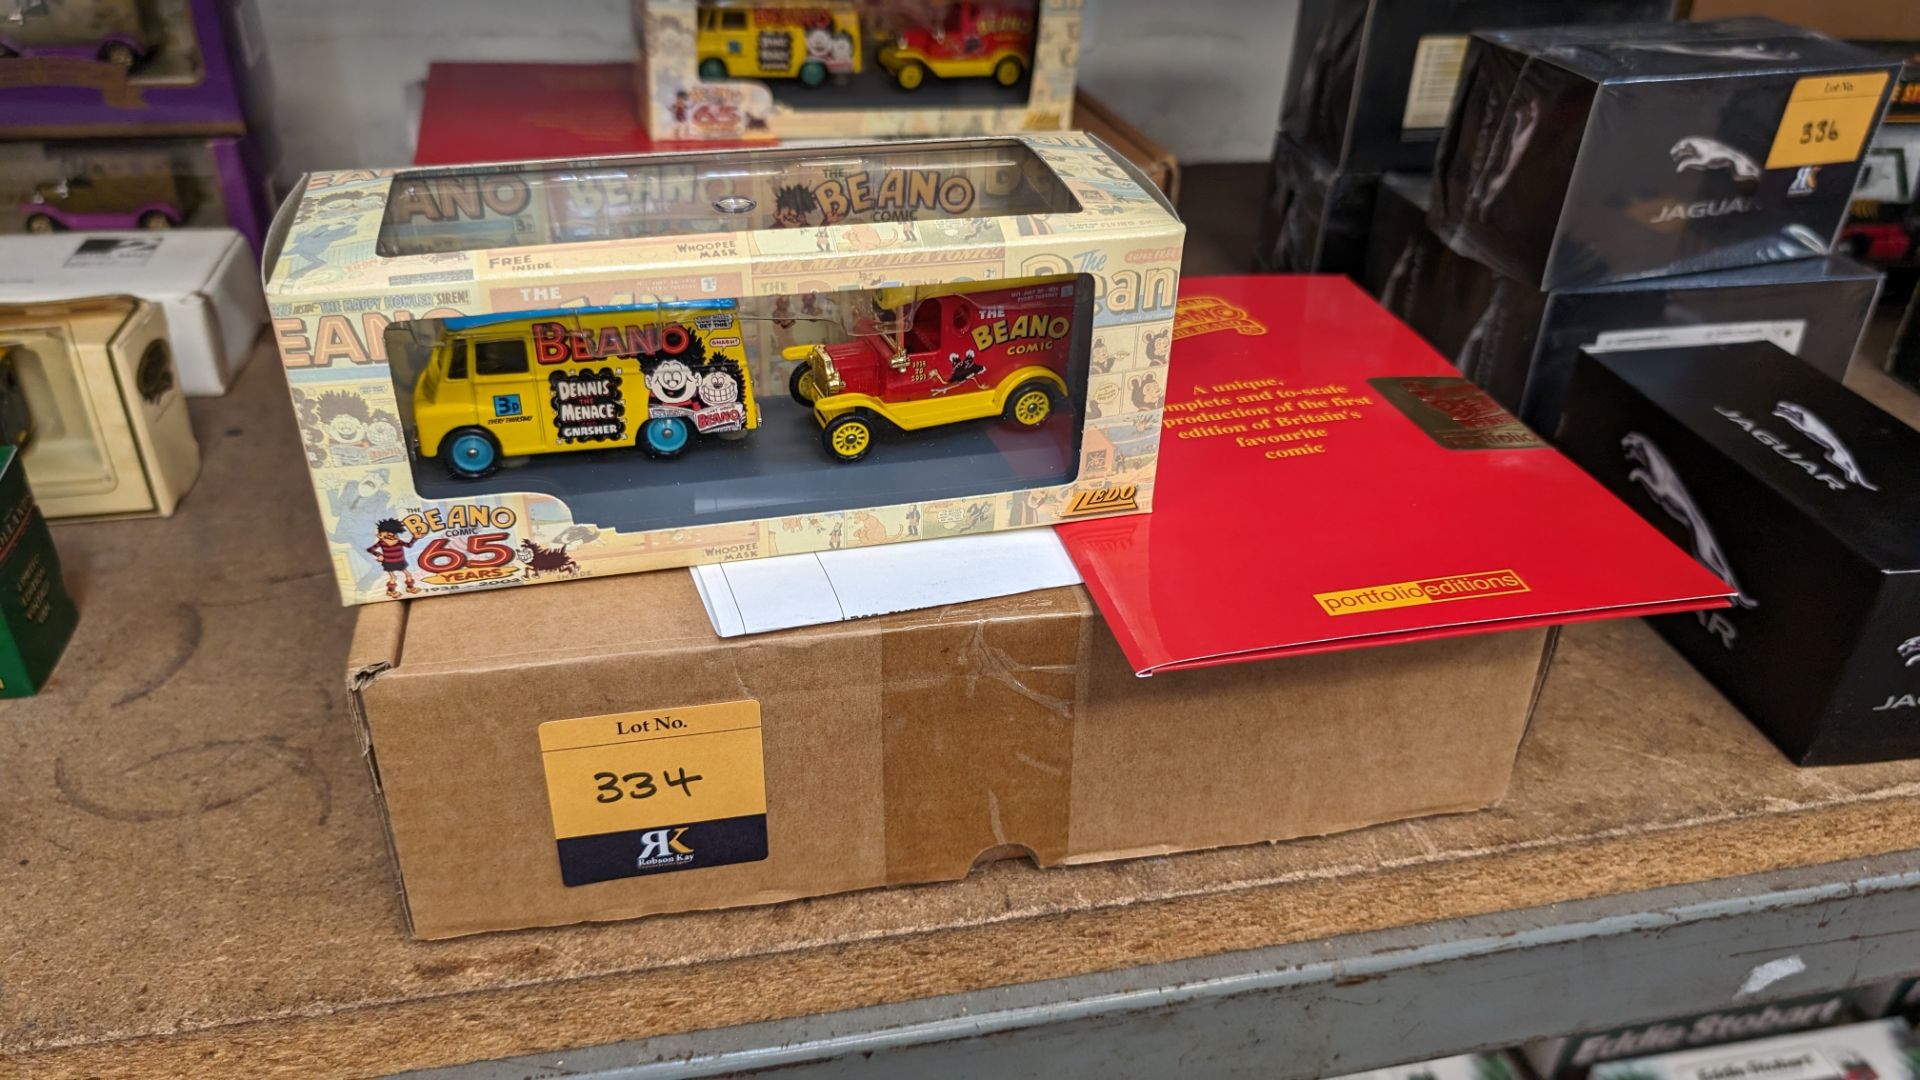 Beano 65th anniversary gift set including reproduction of the first edition of the comic plus 2 mode